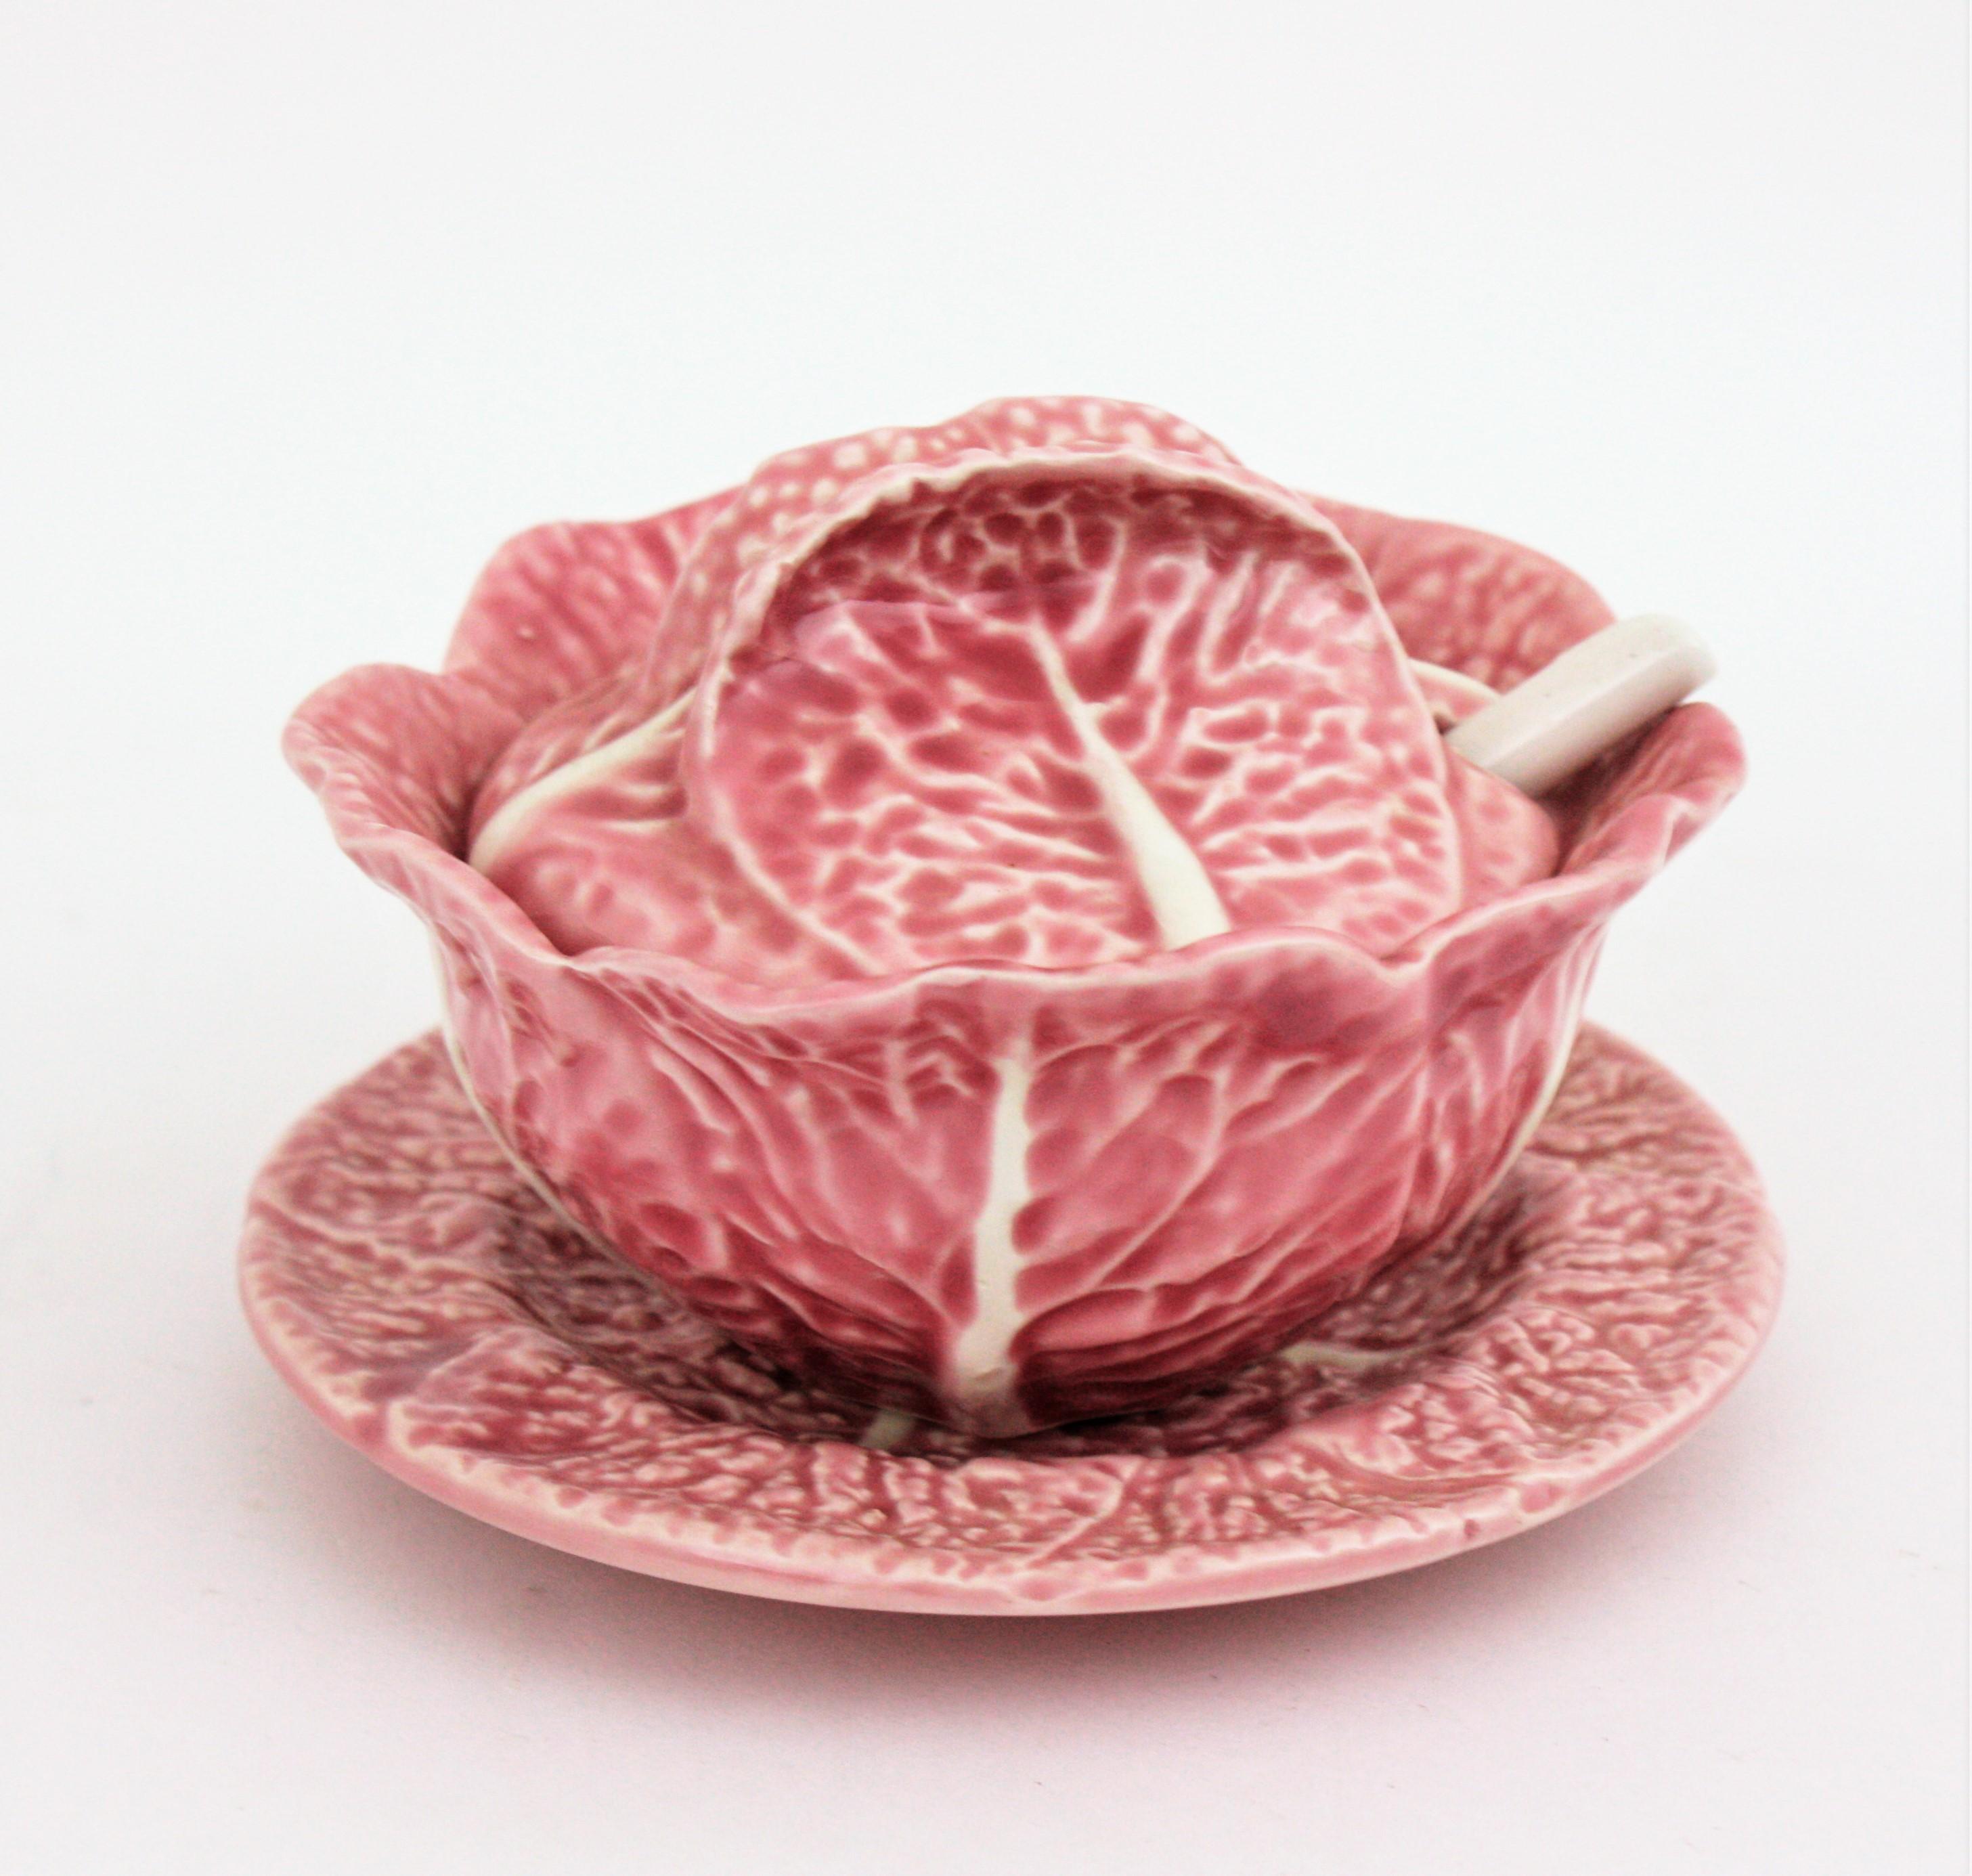 A lovely hand painted Majolica ceramic pink cabbage small tureen, sugar bowl or sauceboat with lid. Manufactured by Bordallo Pinheiro.
Portugal, 1960s
This eye-catching small cabbage tureen has a very realistic design with leaves thorough. The lid